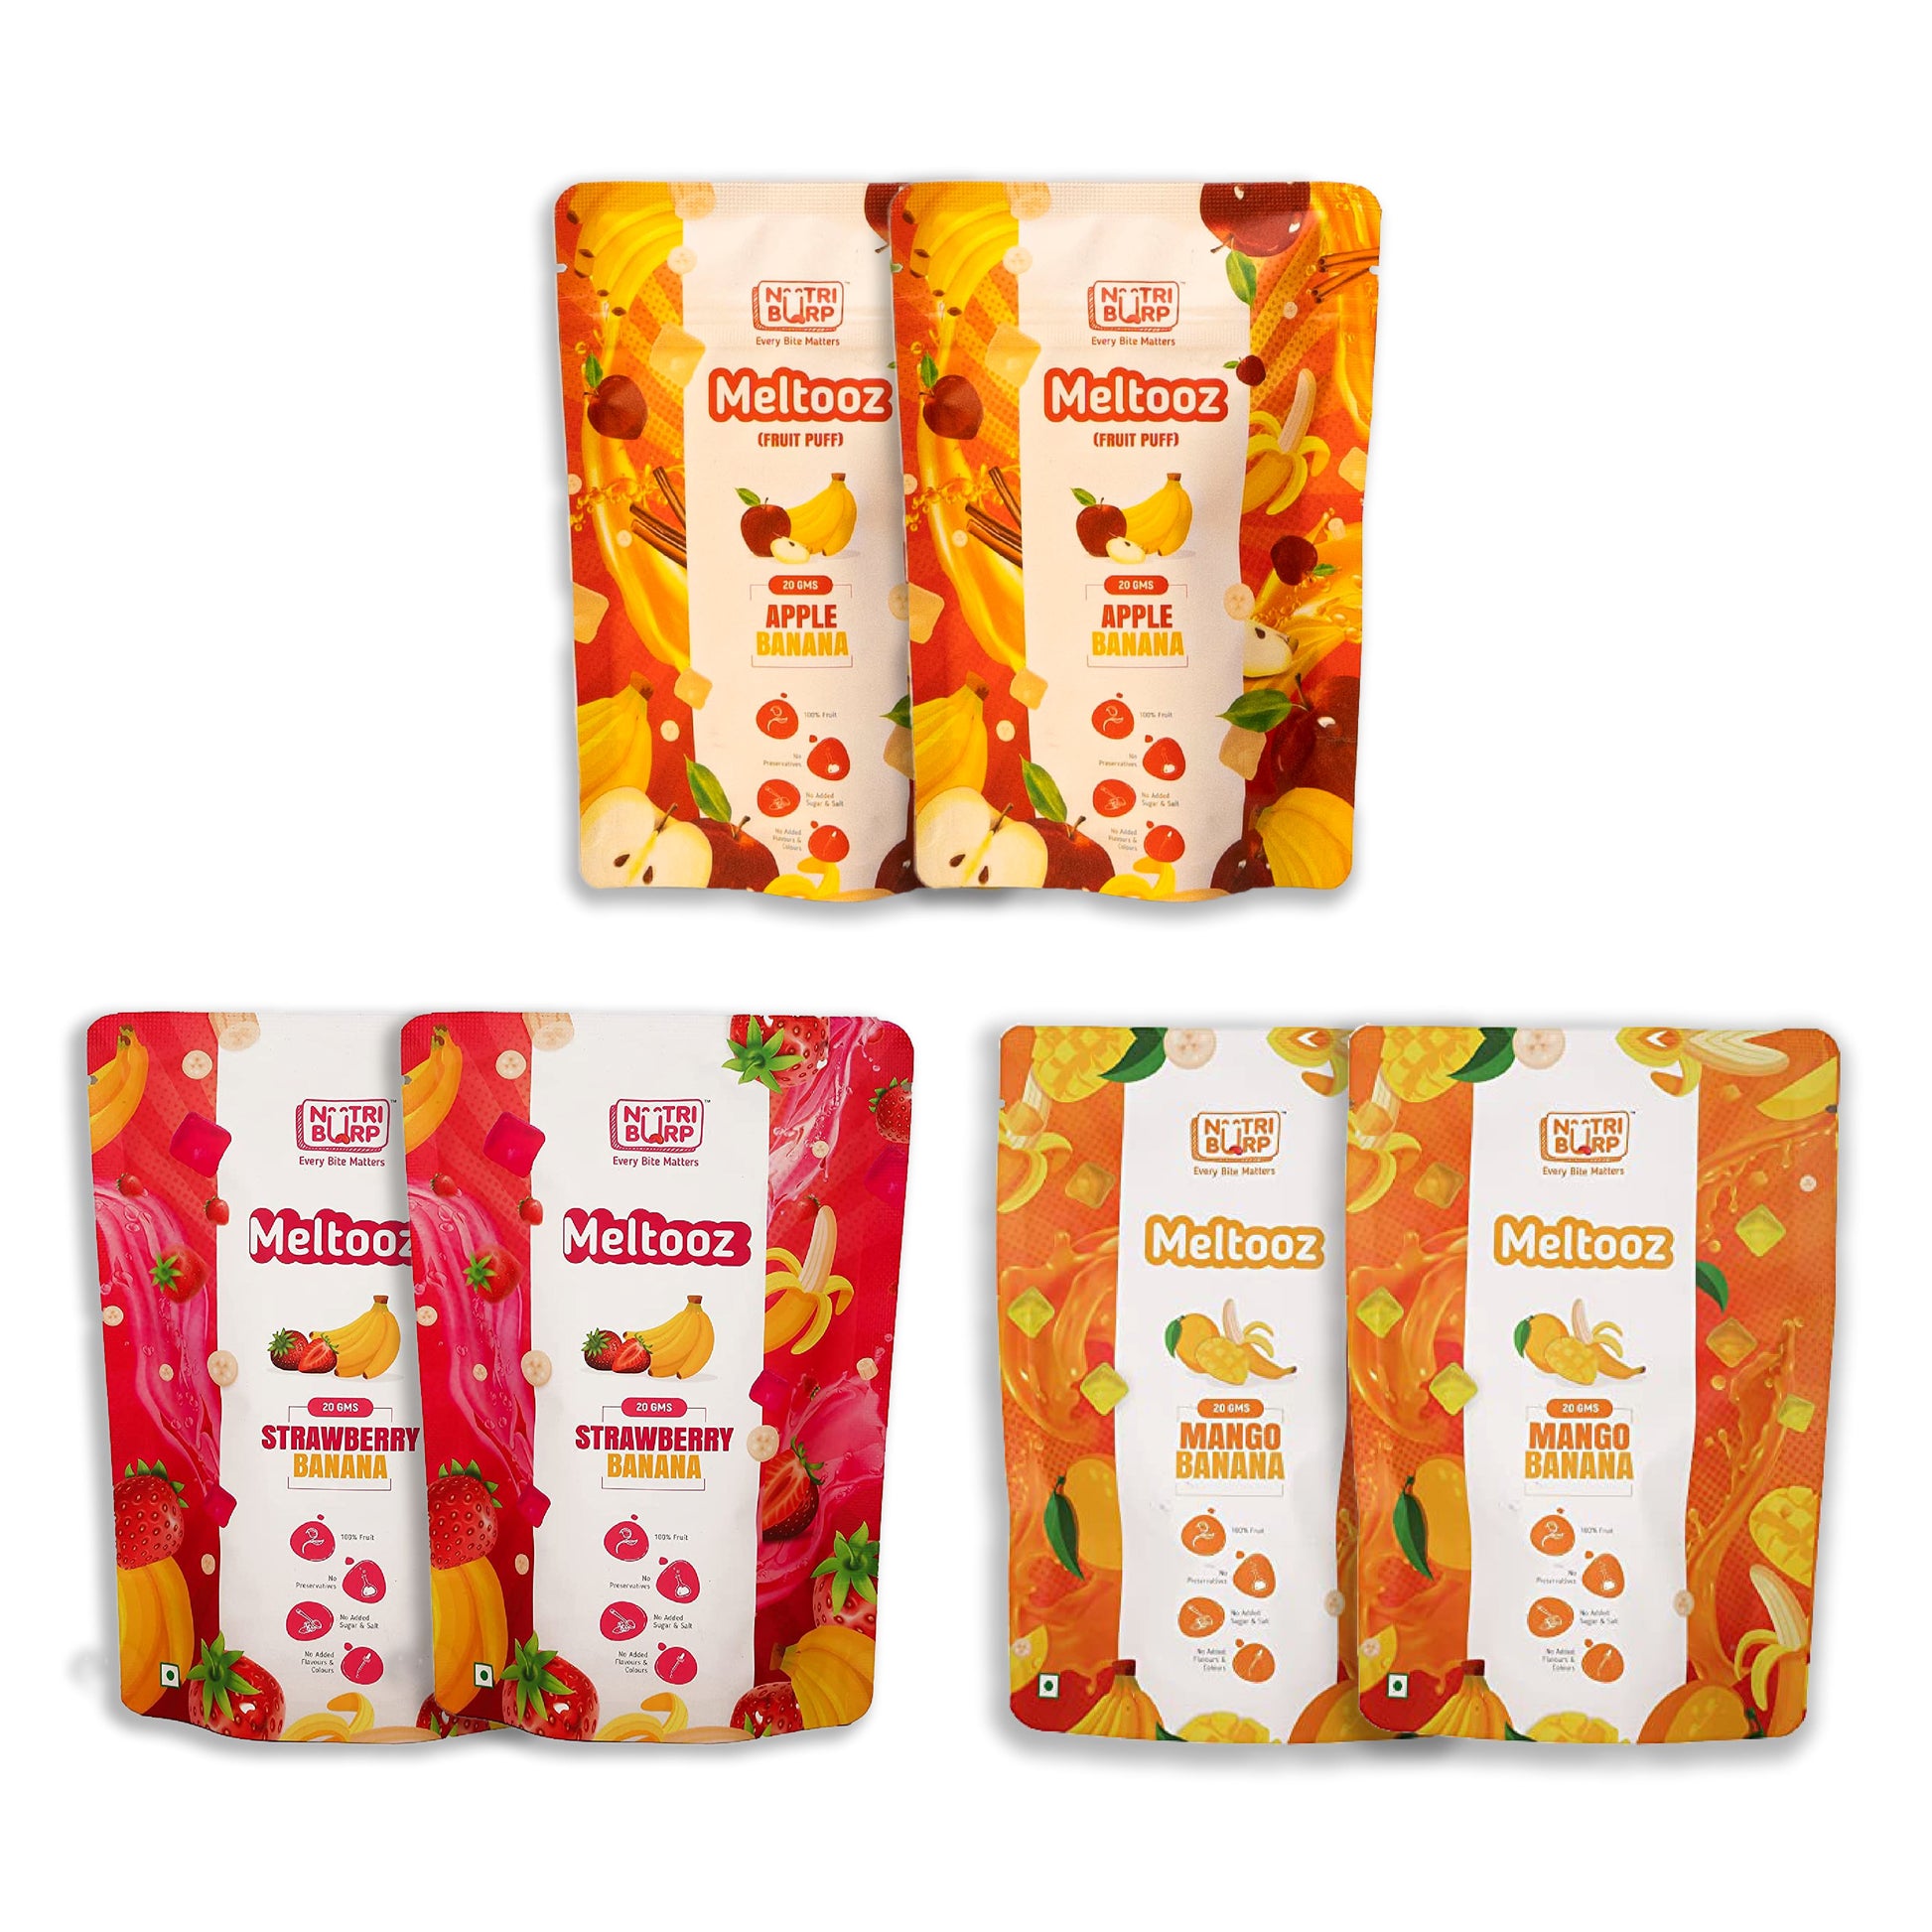 Apple +Mango + Strawberry Meltooz (20g each) - Ideal for 9 Months+ Baby & Toddler Food nutriburp Pack of 6 